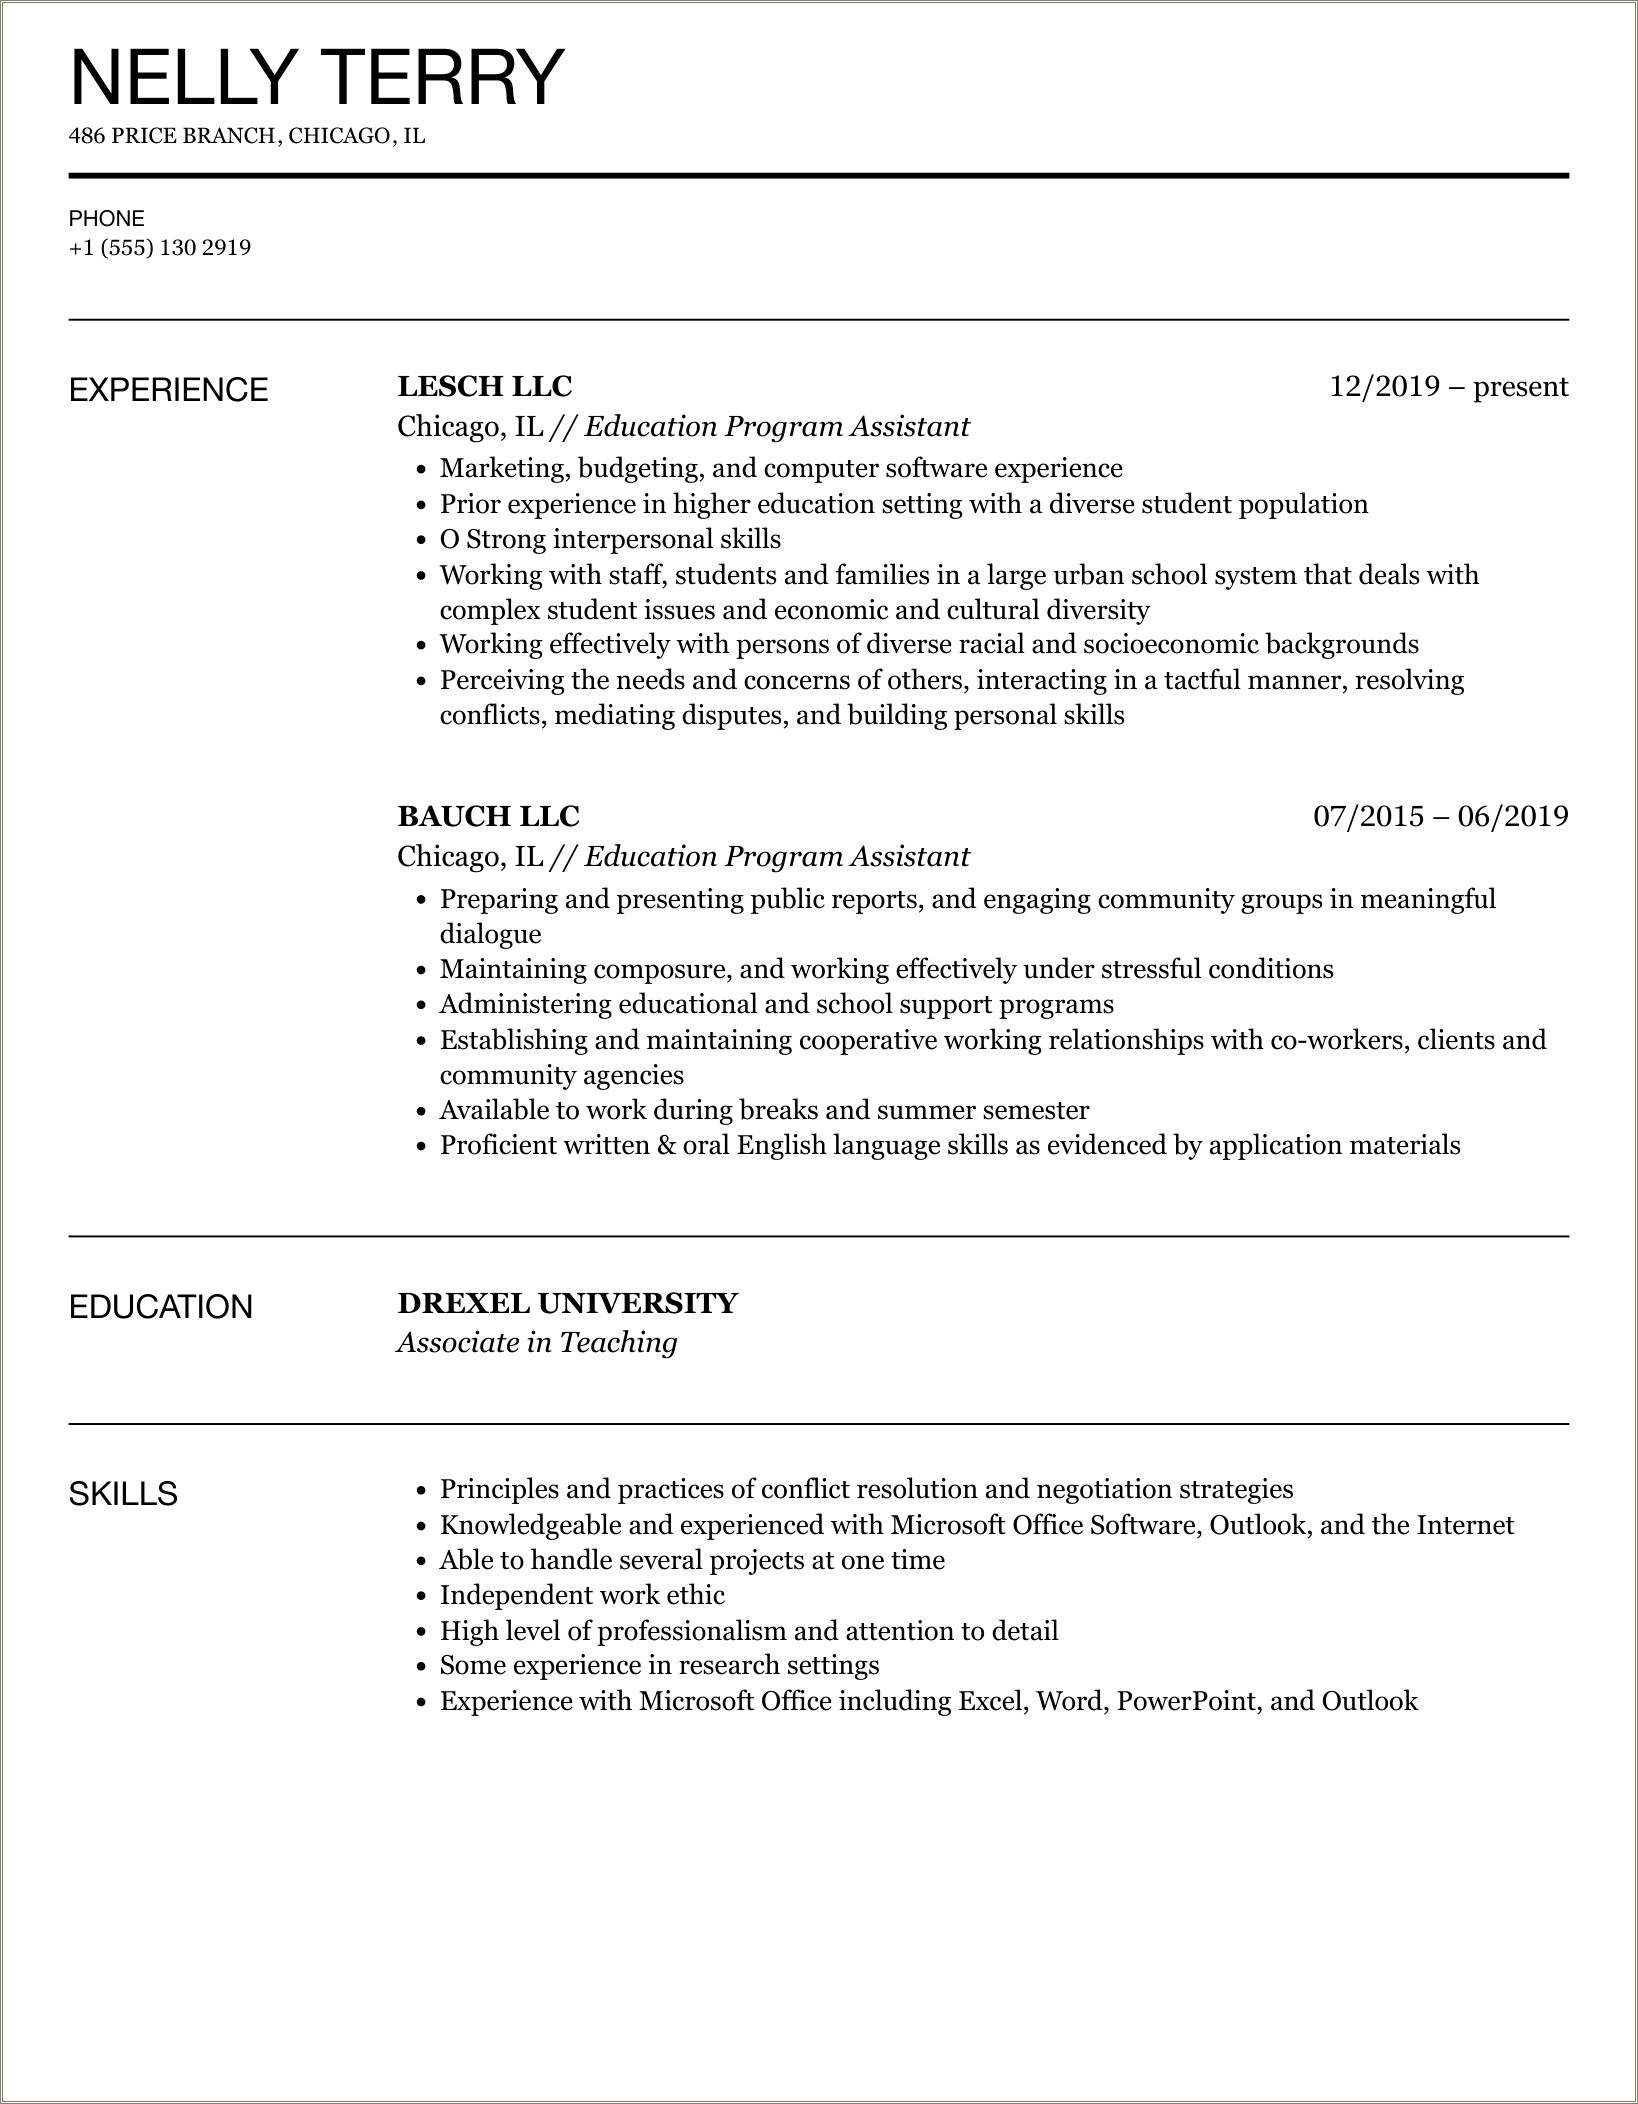 Resume Objectives For Child And Youth Program Assistant